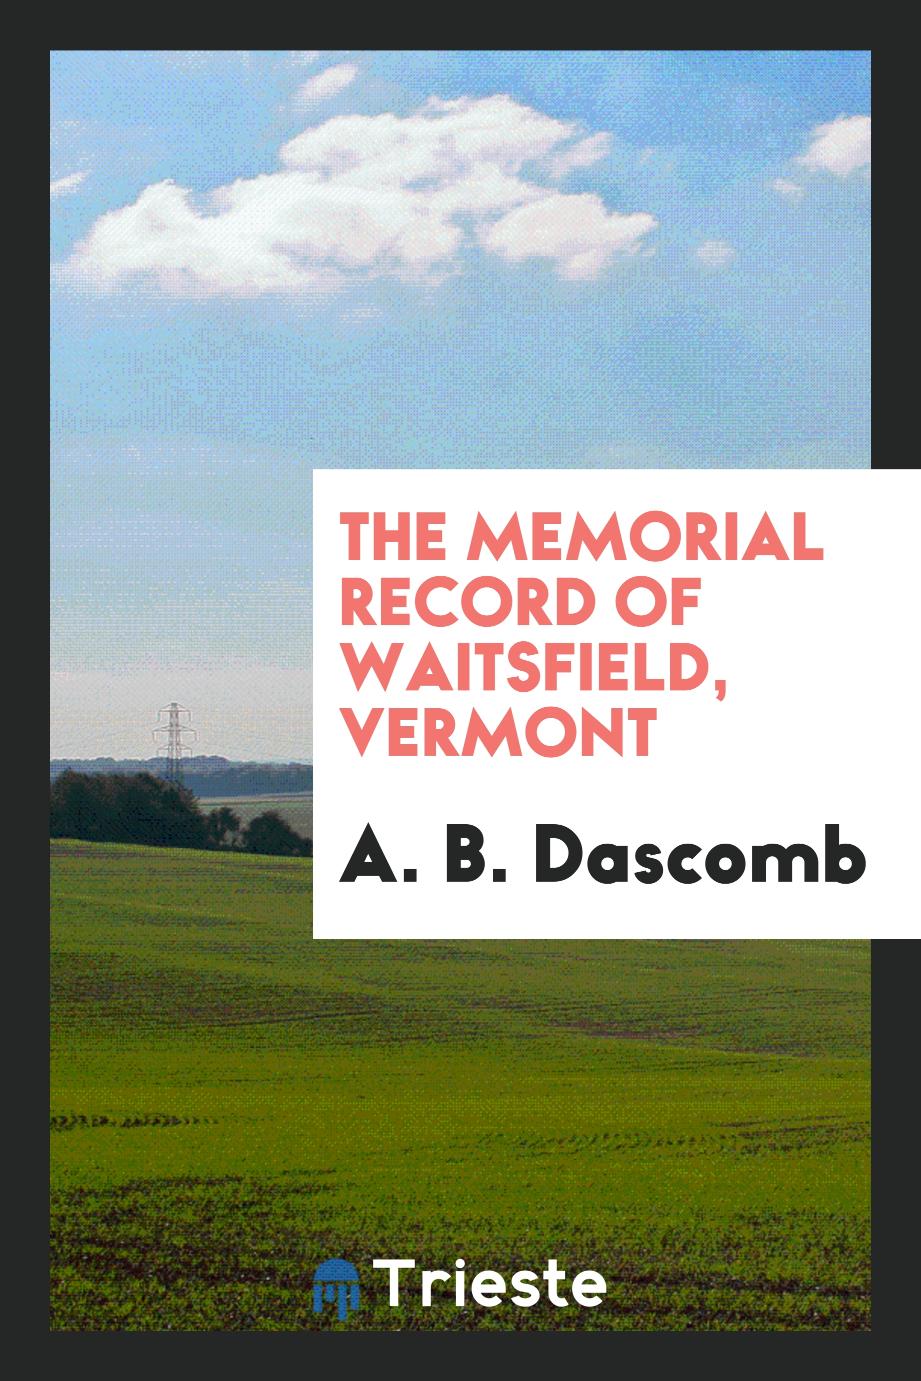 The memorial record of Waitsfield, Vermont